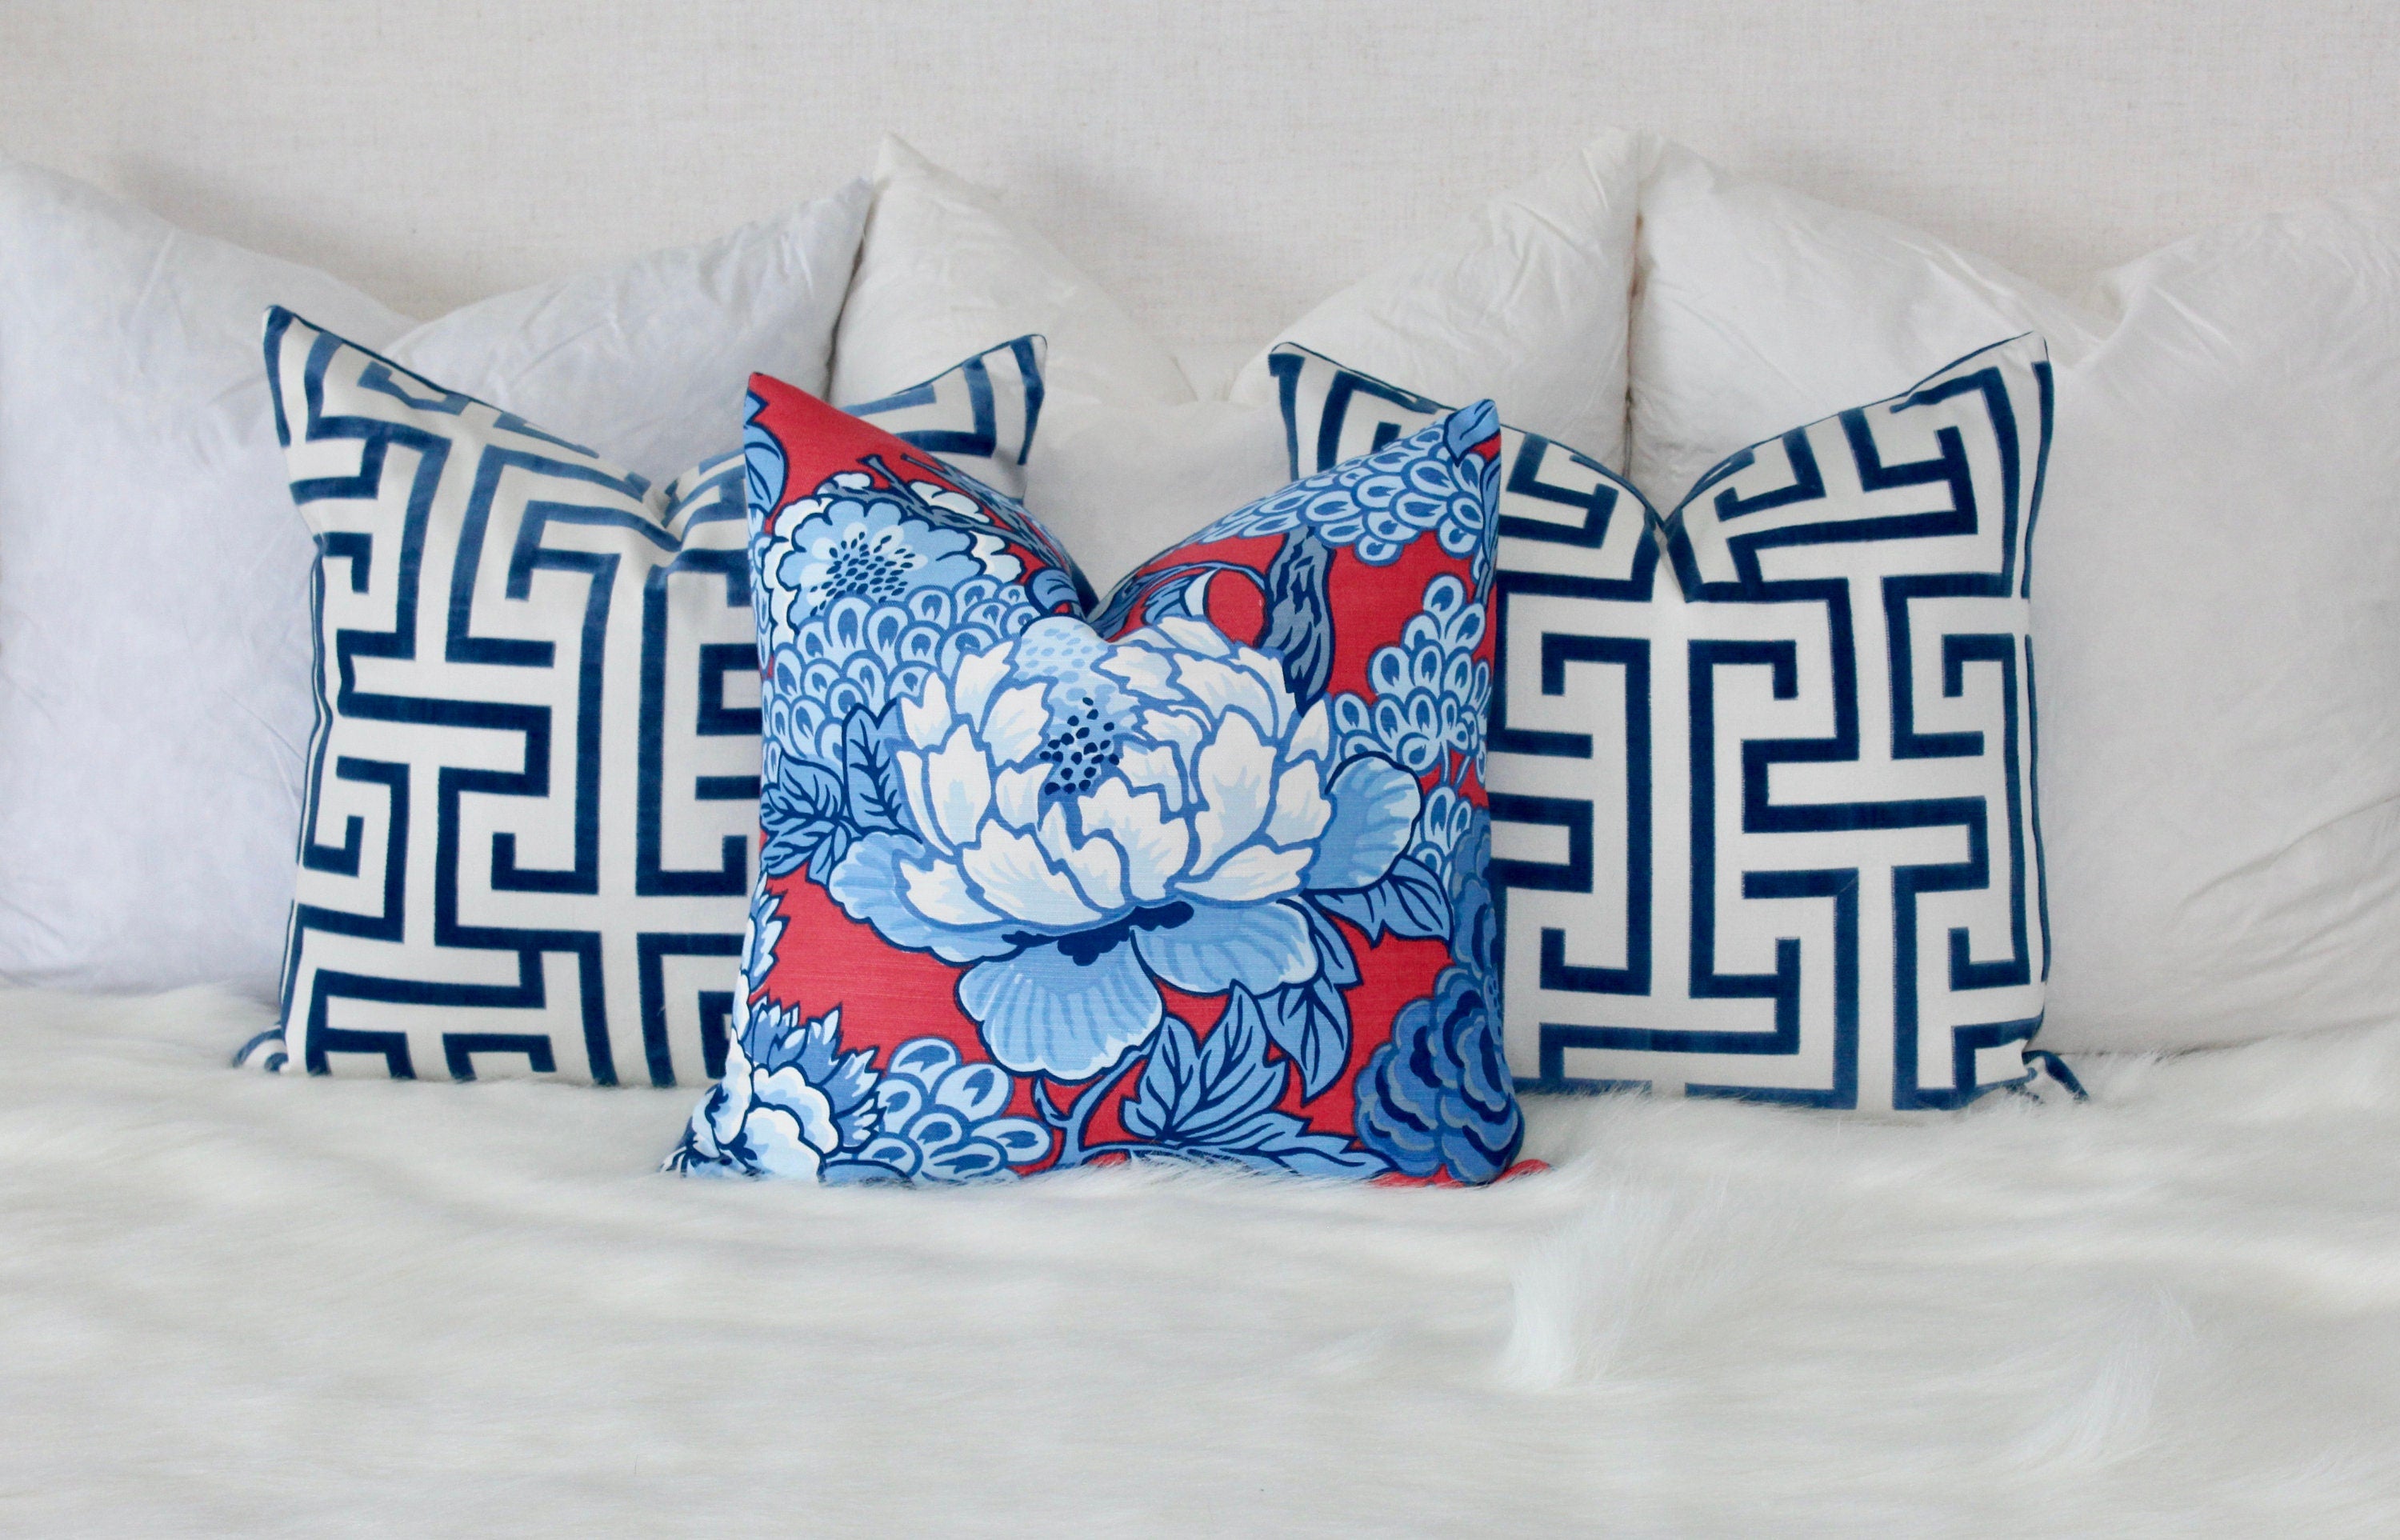 Thibaut Honshu Pillow in Blue and Red. Chinoiserie Floral Pillow, Accent Pillow cover, High End Cushion, Euro Sham, Designer Throw Pillow